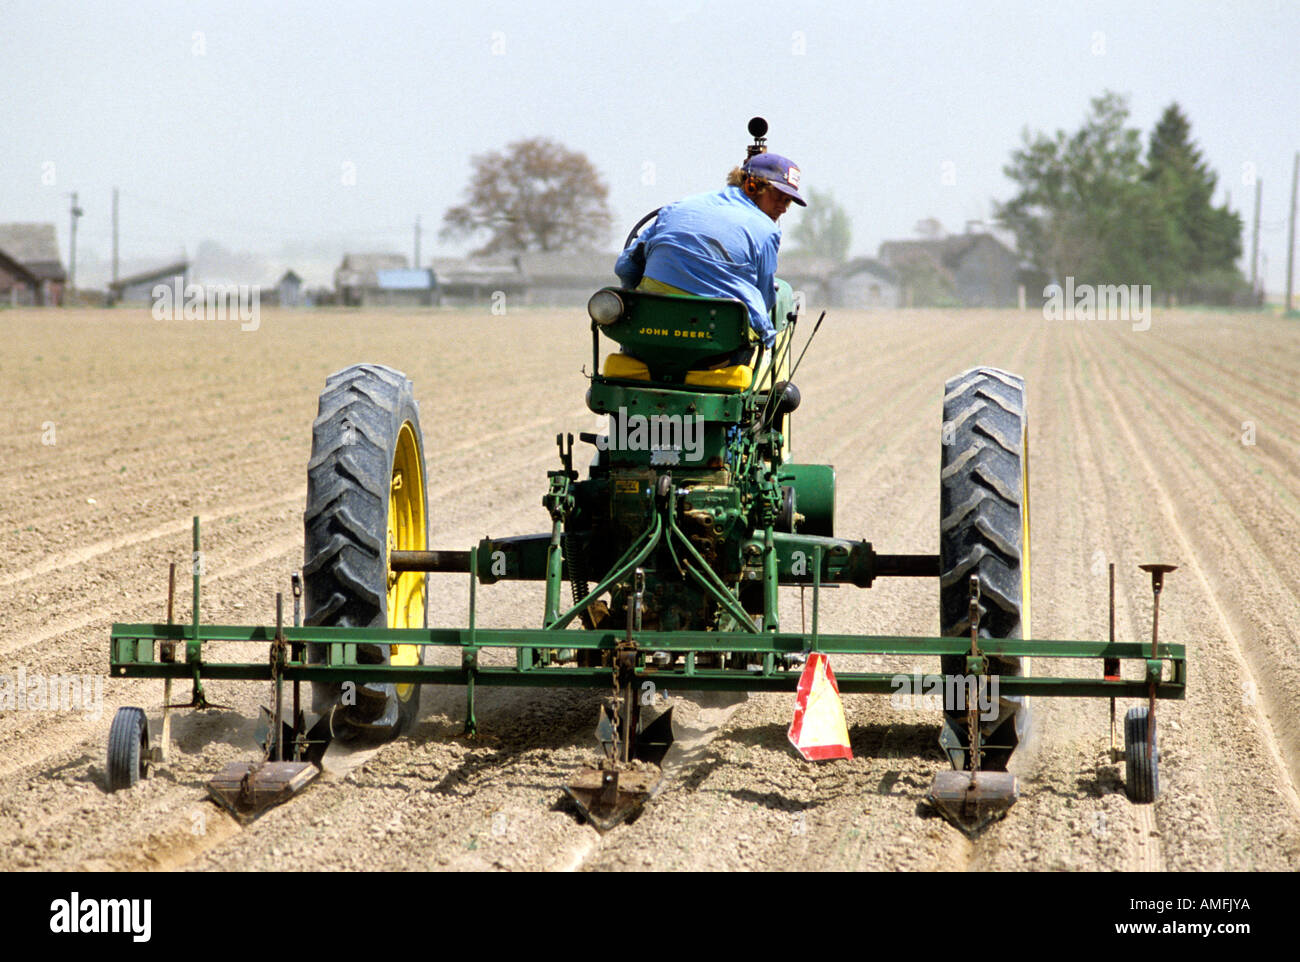 Tractor pulling a cultivator to form corrugates for irrigation. Stock Photo